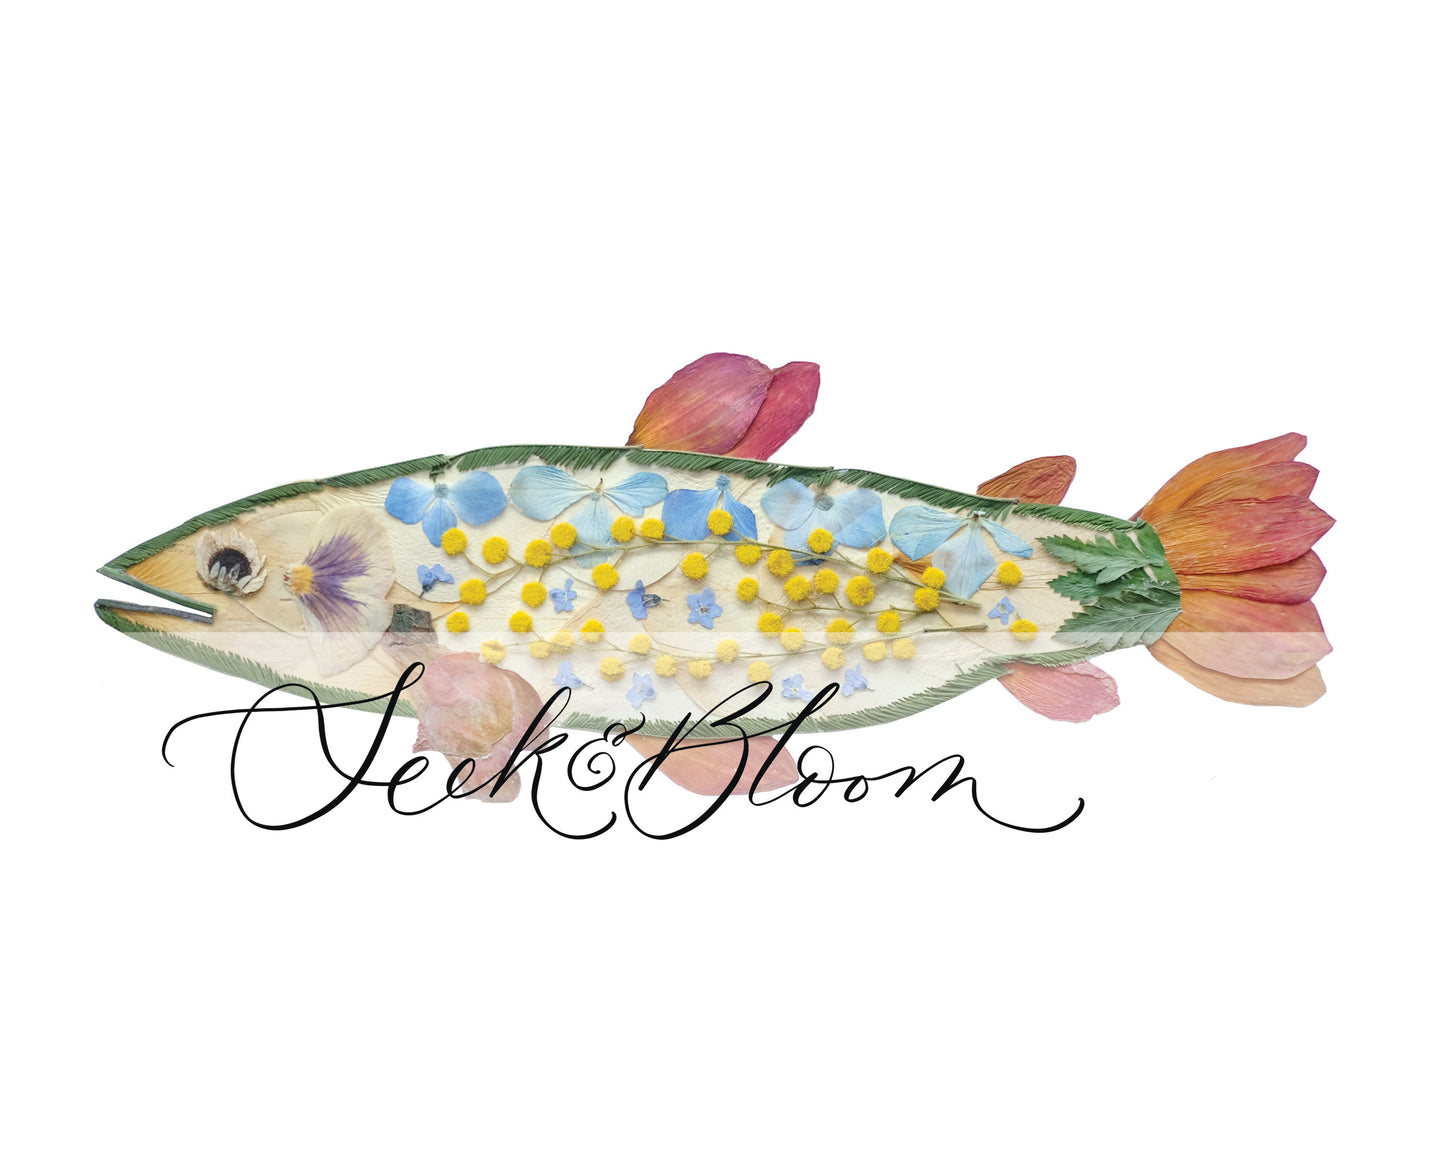 Pretty Trout Fish Artwork made with orange, blue, yellow flowers and greenery.